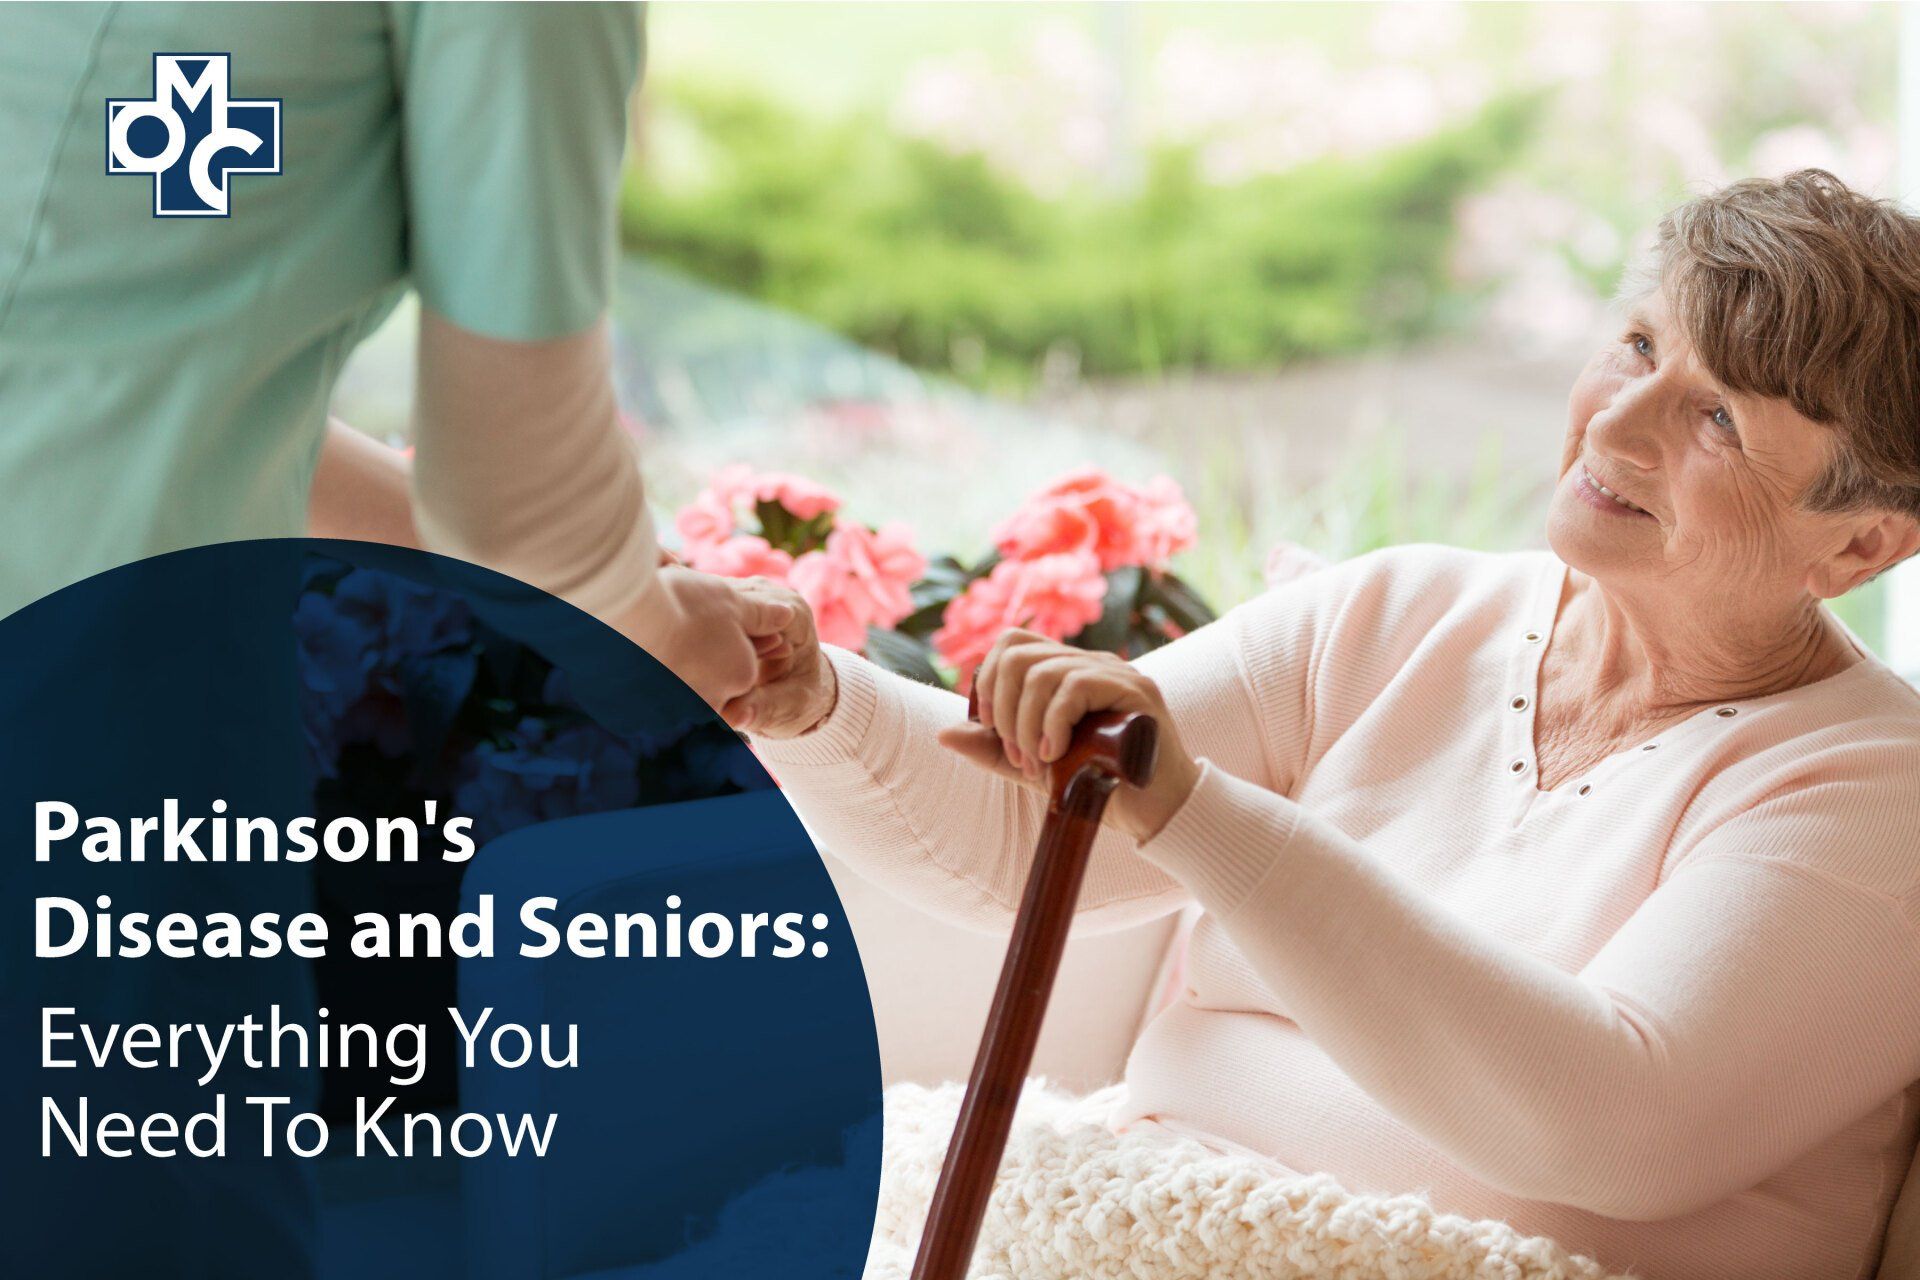 Parkinson's Disease and Seniors: Everything You Need To Know